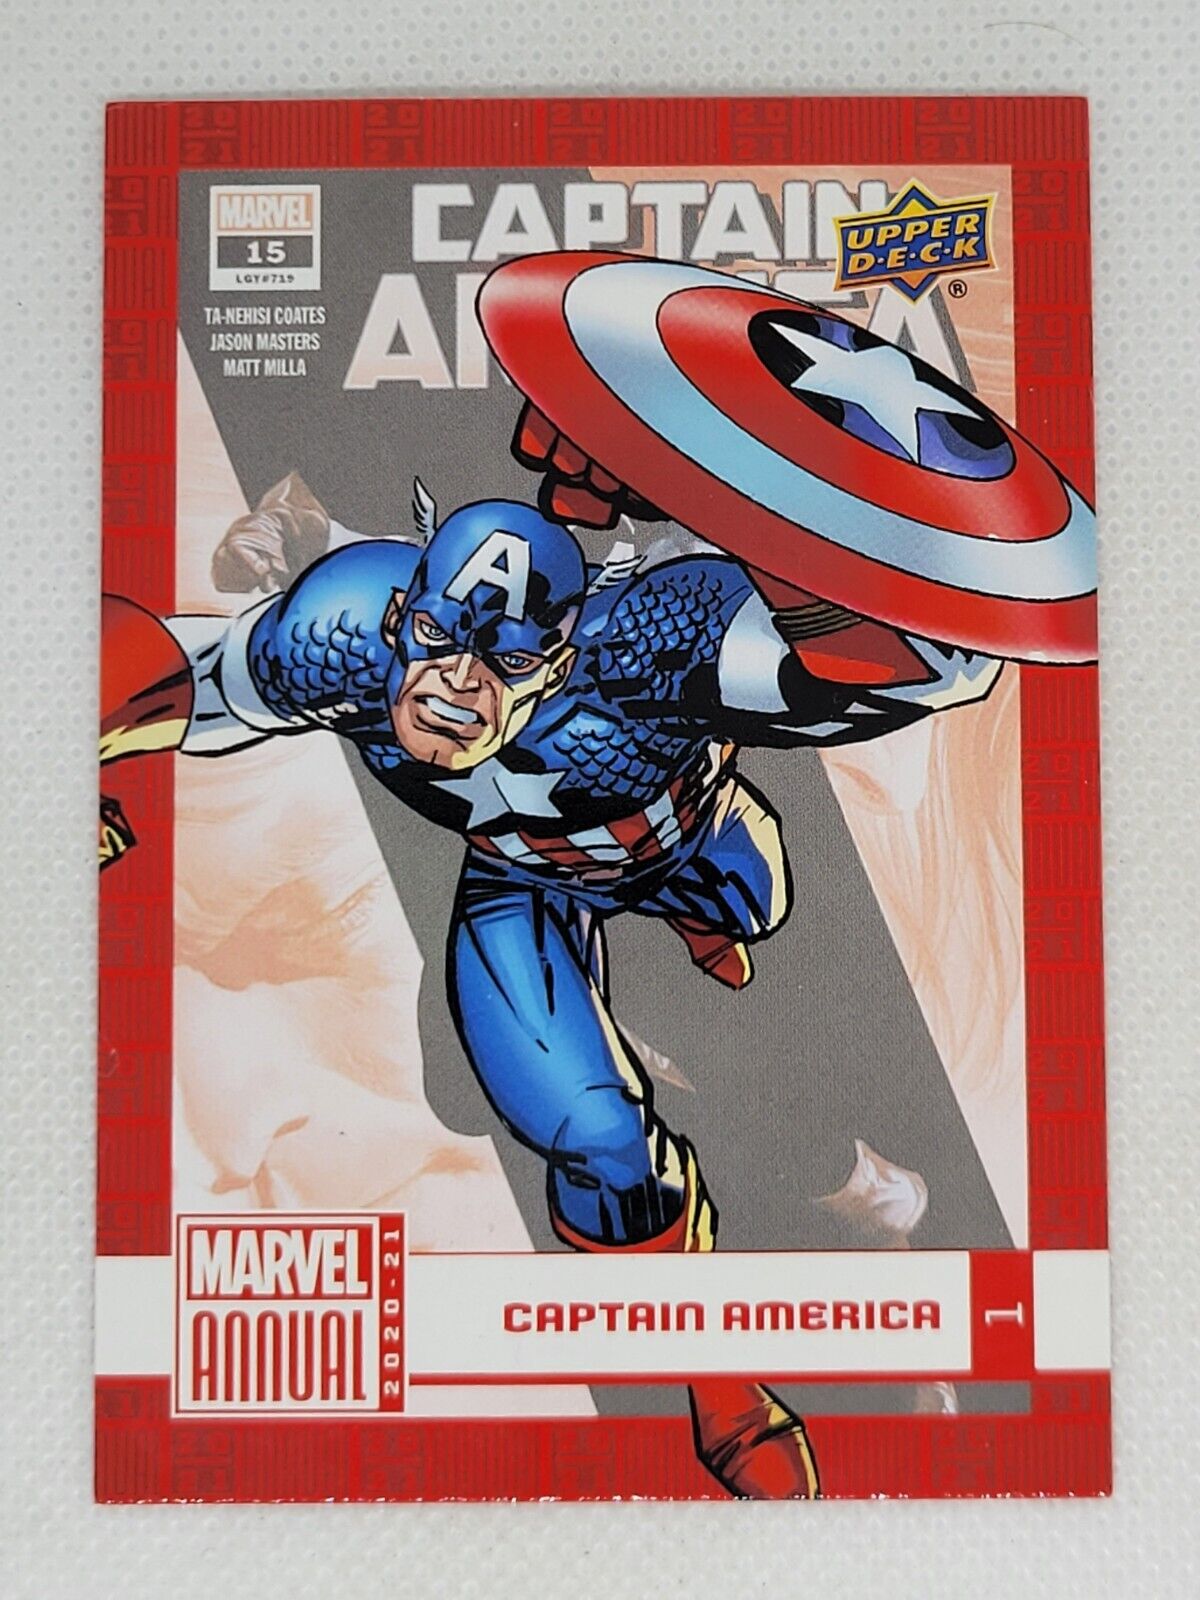 2020-21 Upper Deck Marvel Annual Base Cards + Variant Tiers - You Pick